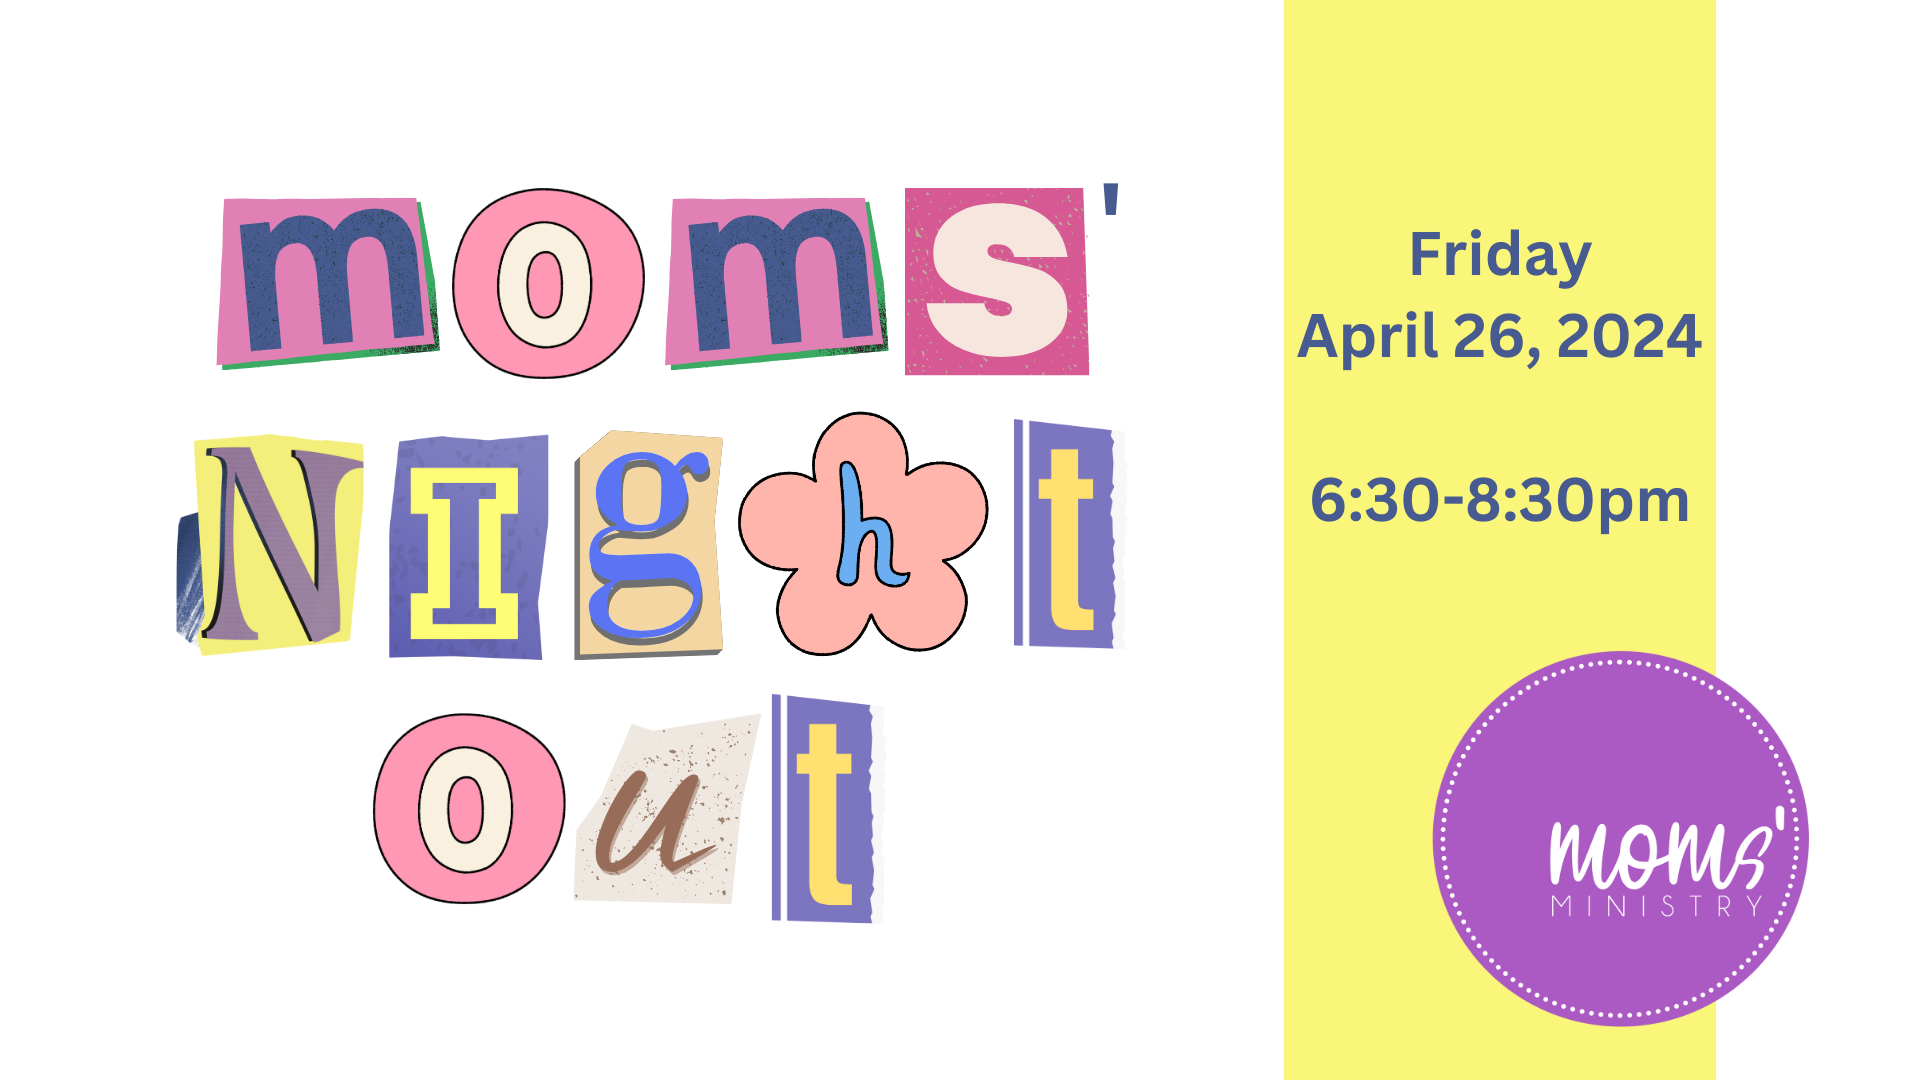 Adults - Moms Night Out